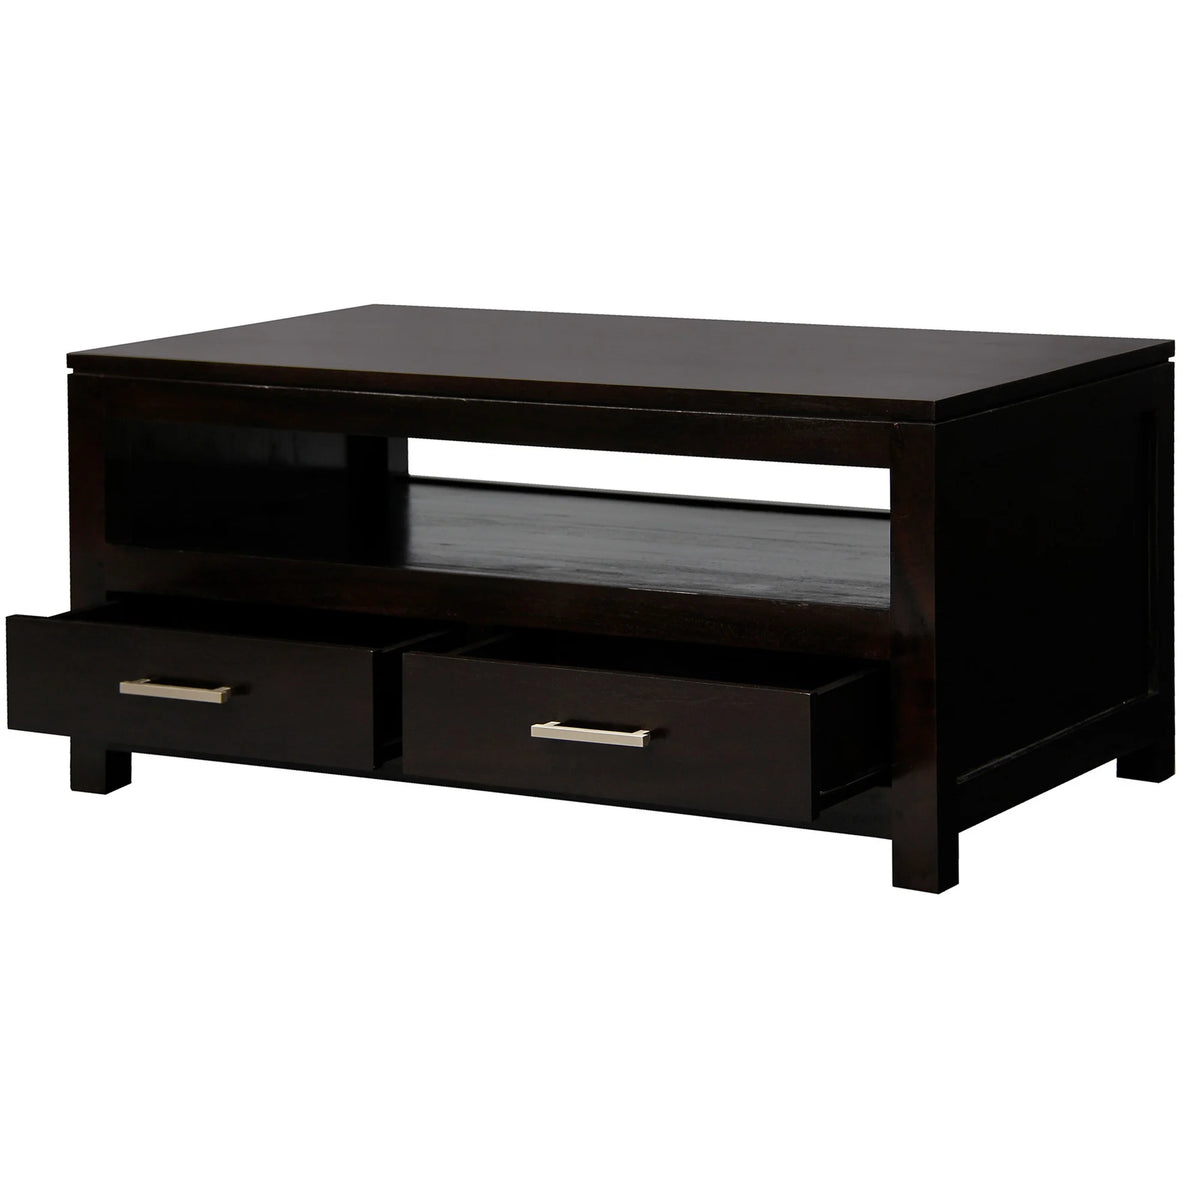 Paris Solid Timber 4 Drawer Coffee Table - Chocolate